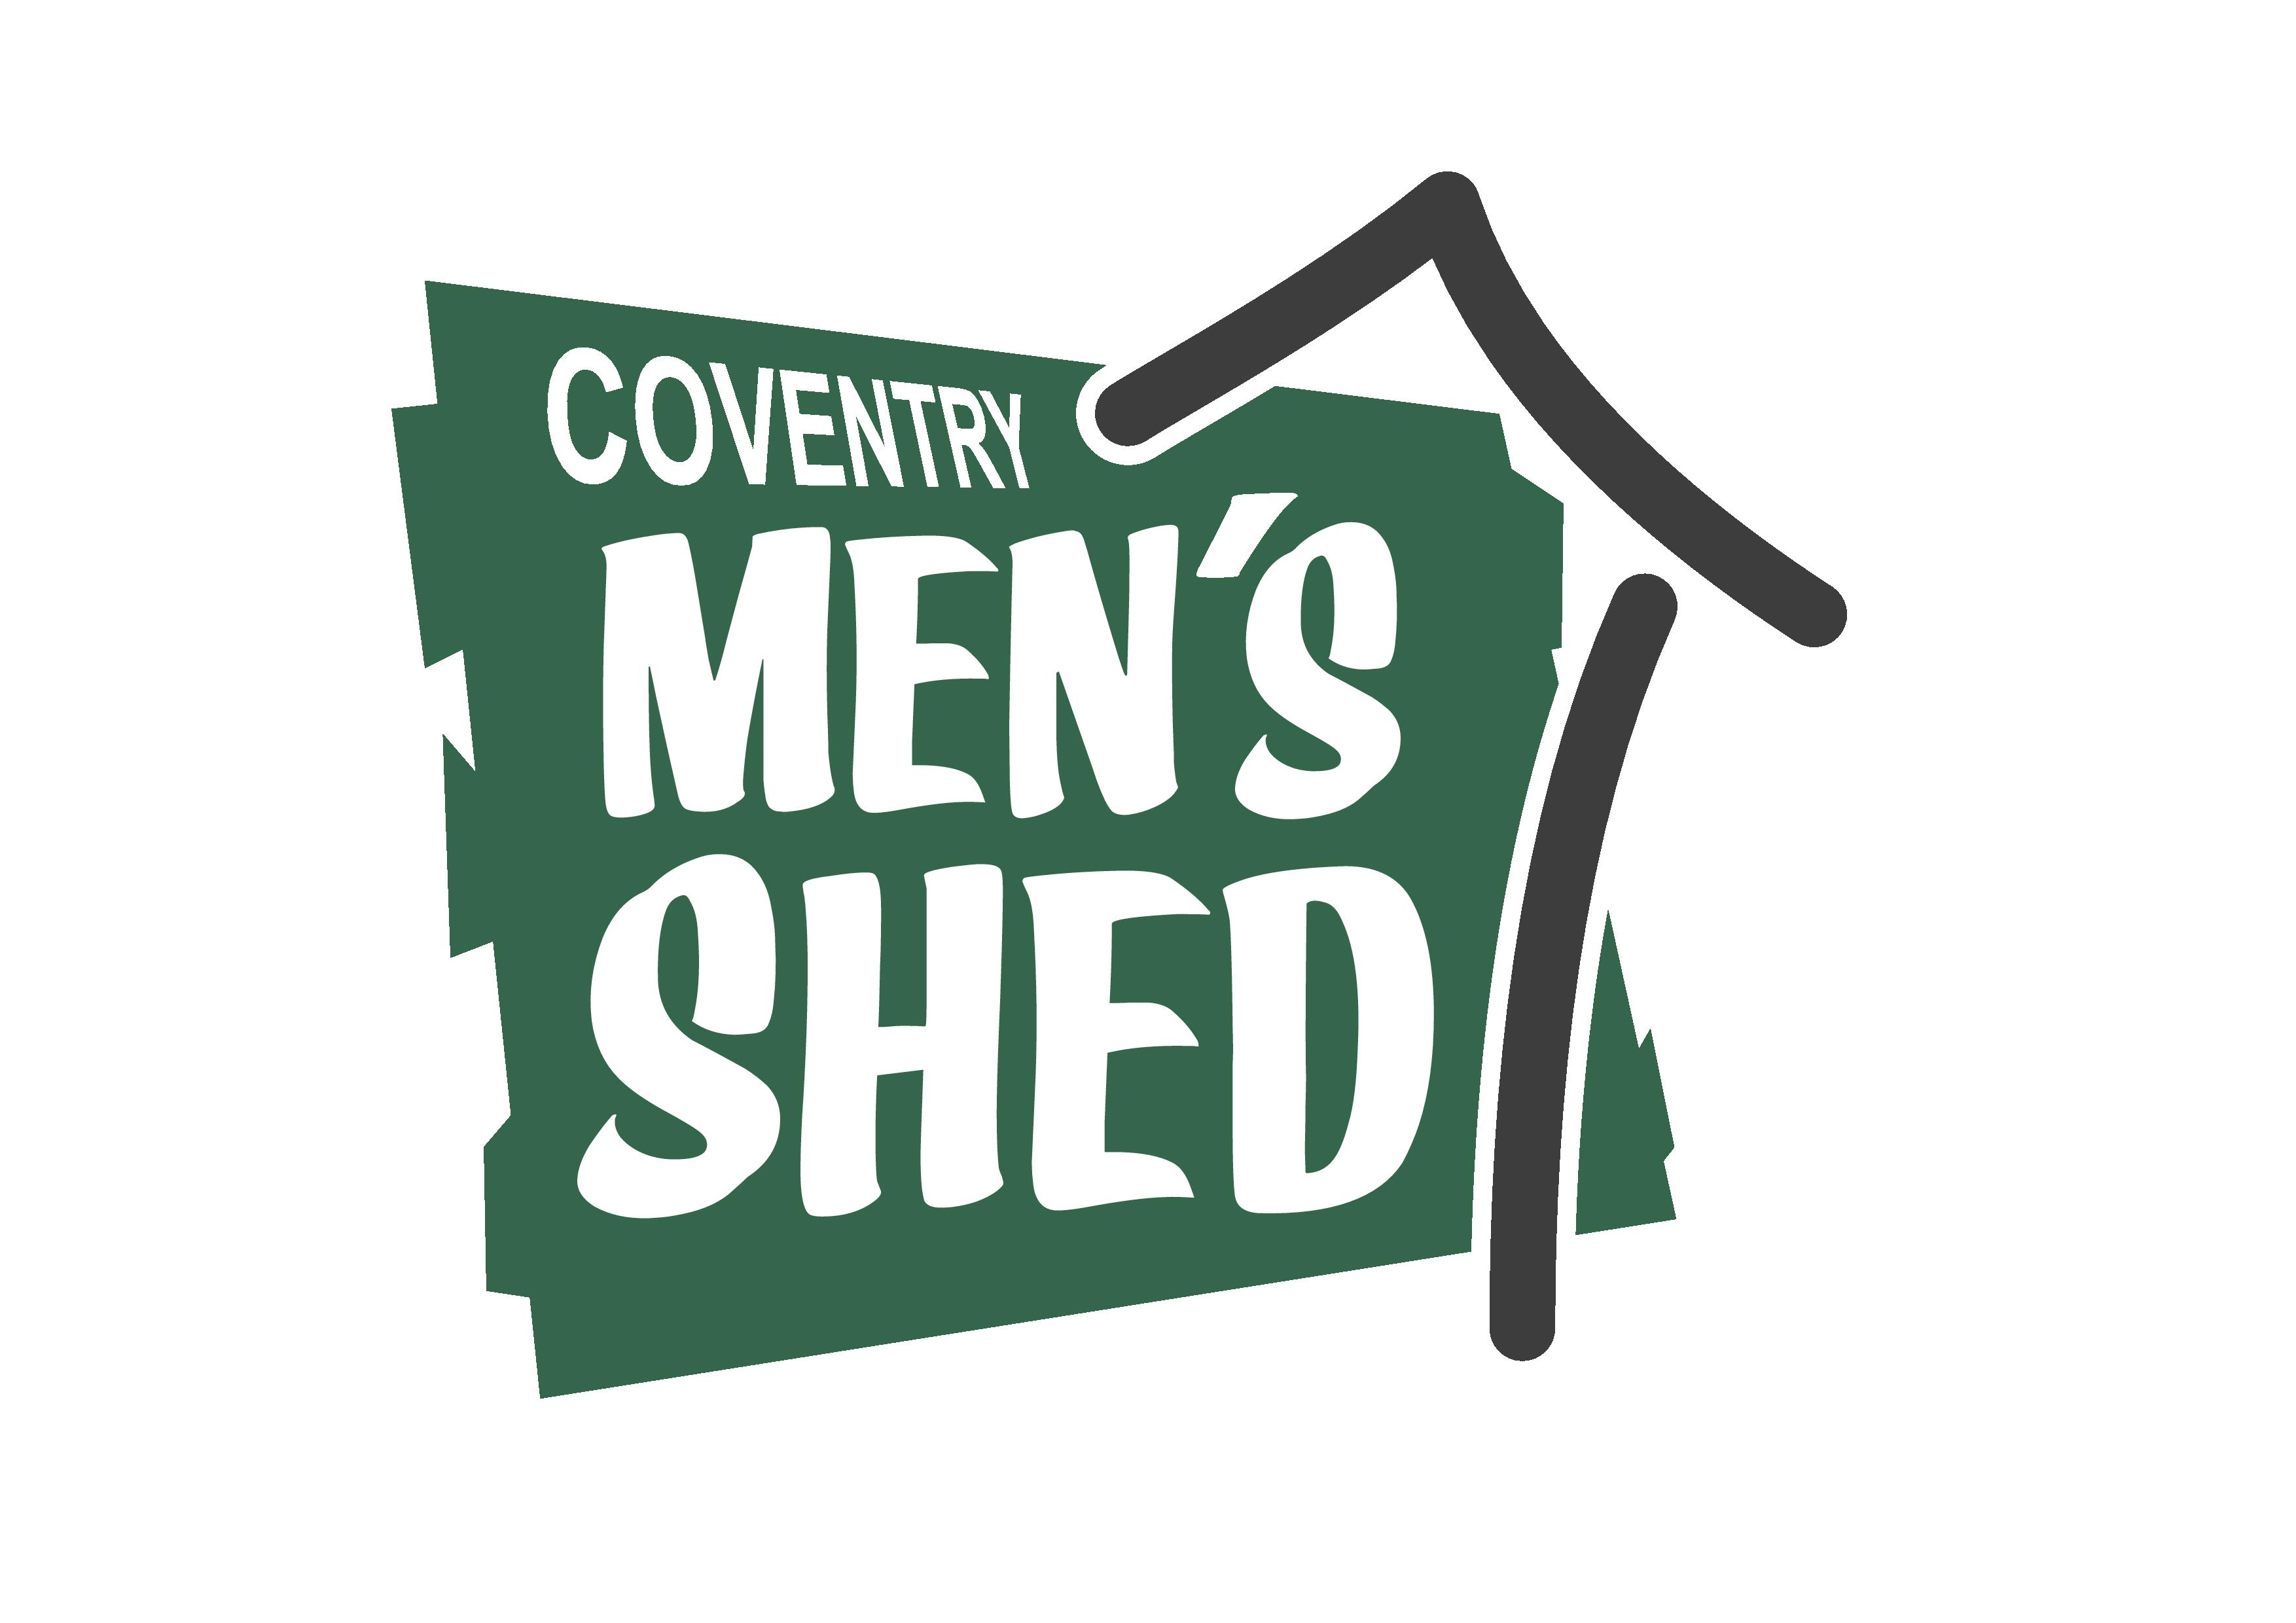 Coventry mens shed logo